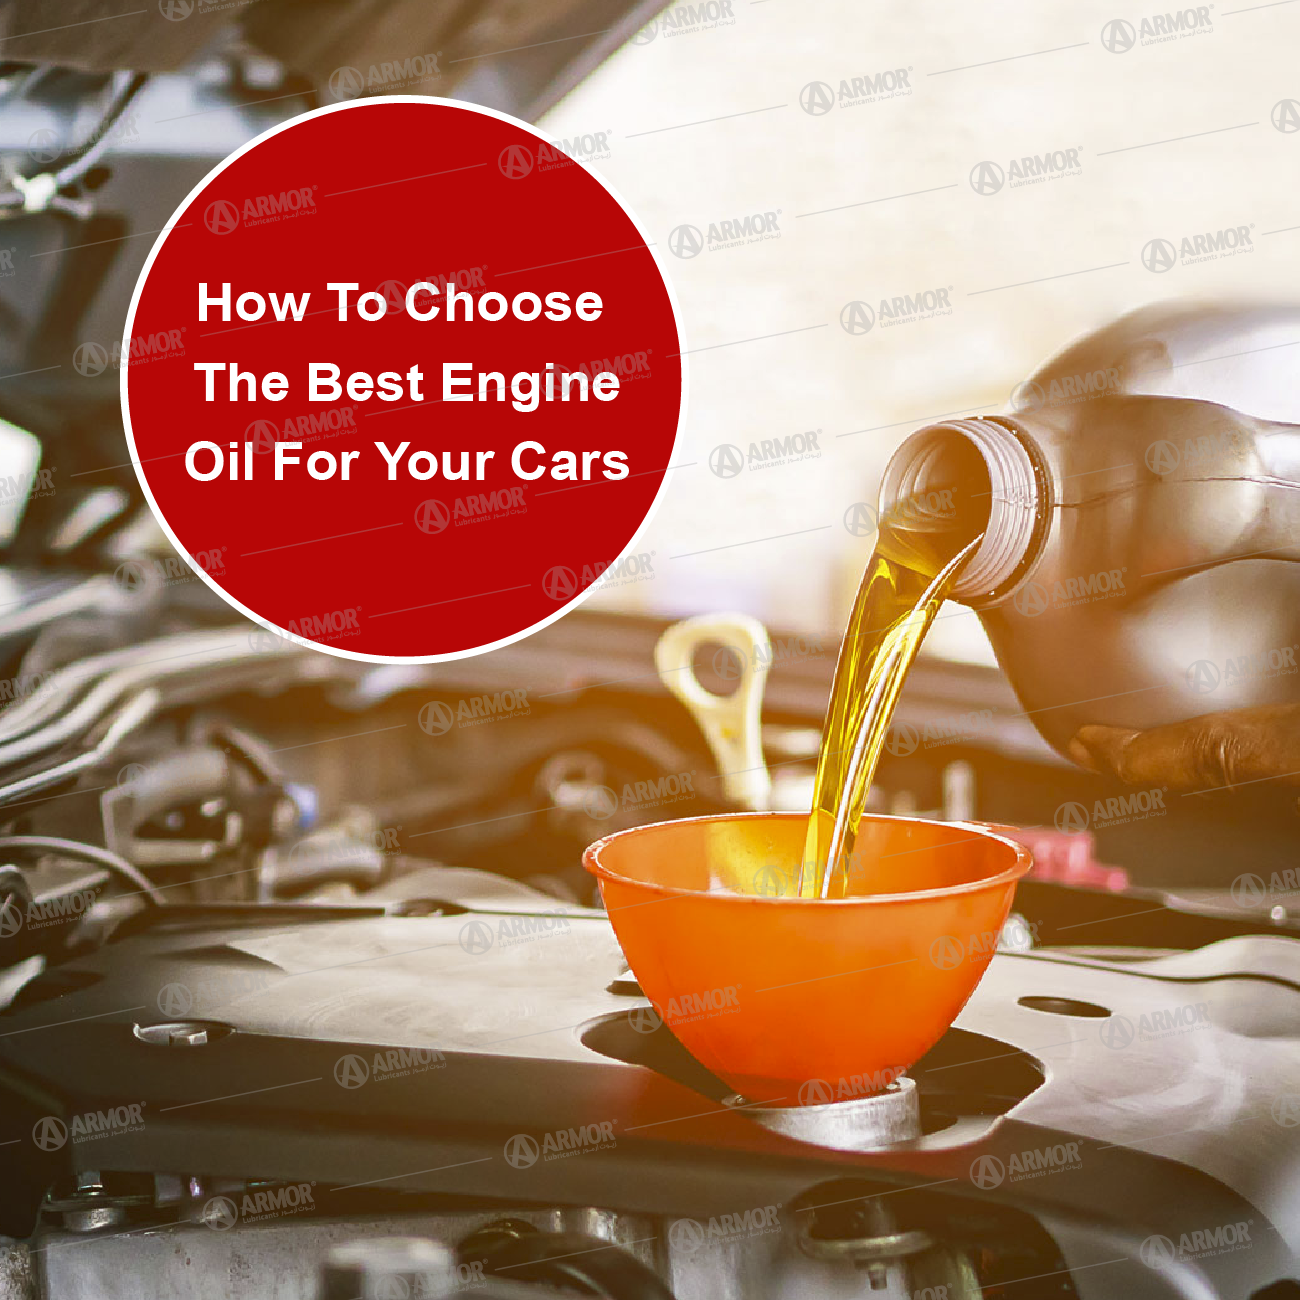 How to choose the best engine oil for your cars